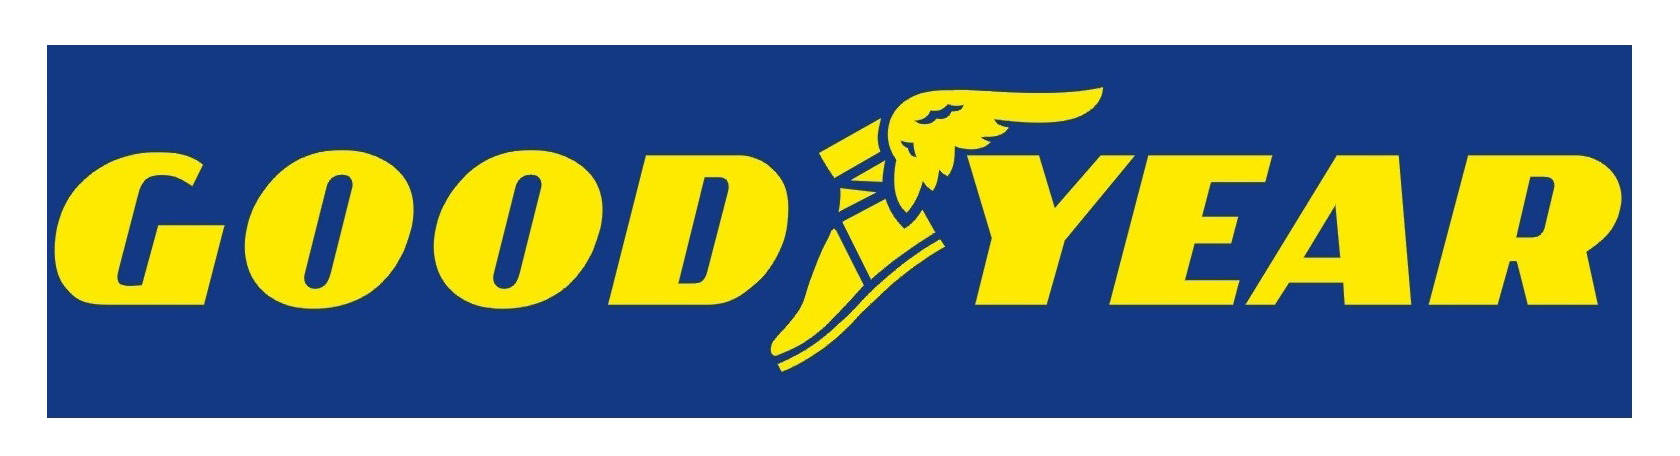 goodyear: get up to $100 back* or up to $200 when you use your goodyear credit card offer